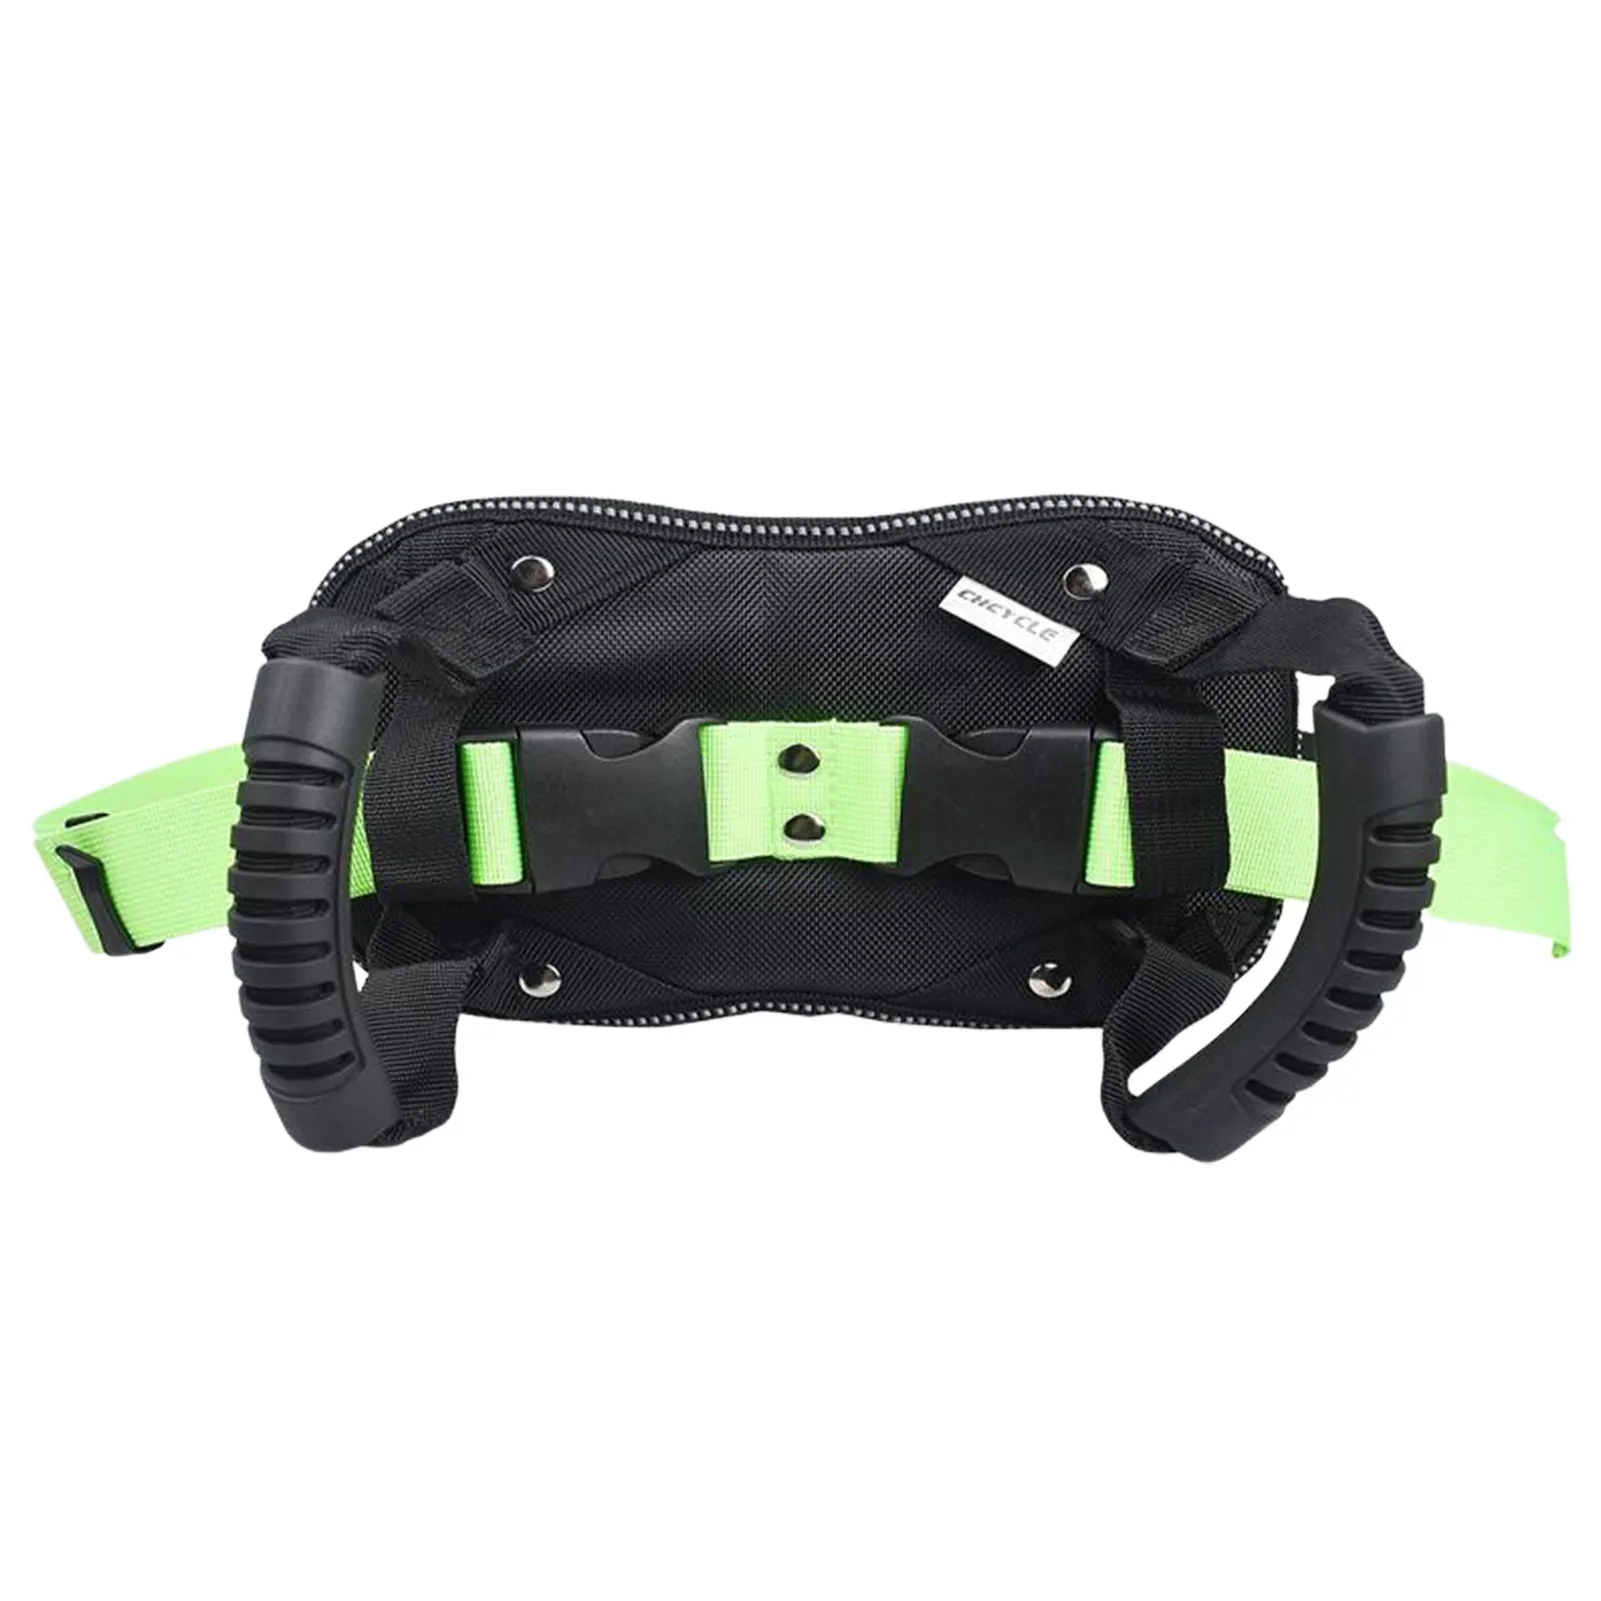 

Motorcycle Safety Belt For Passenger Sturdy Motorcycle Grab Handles Beach Snowmobile Handrail Motorcycle Harness For Kids With